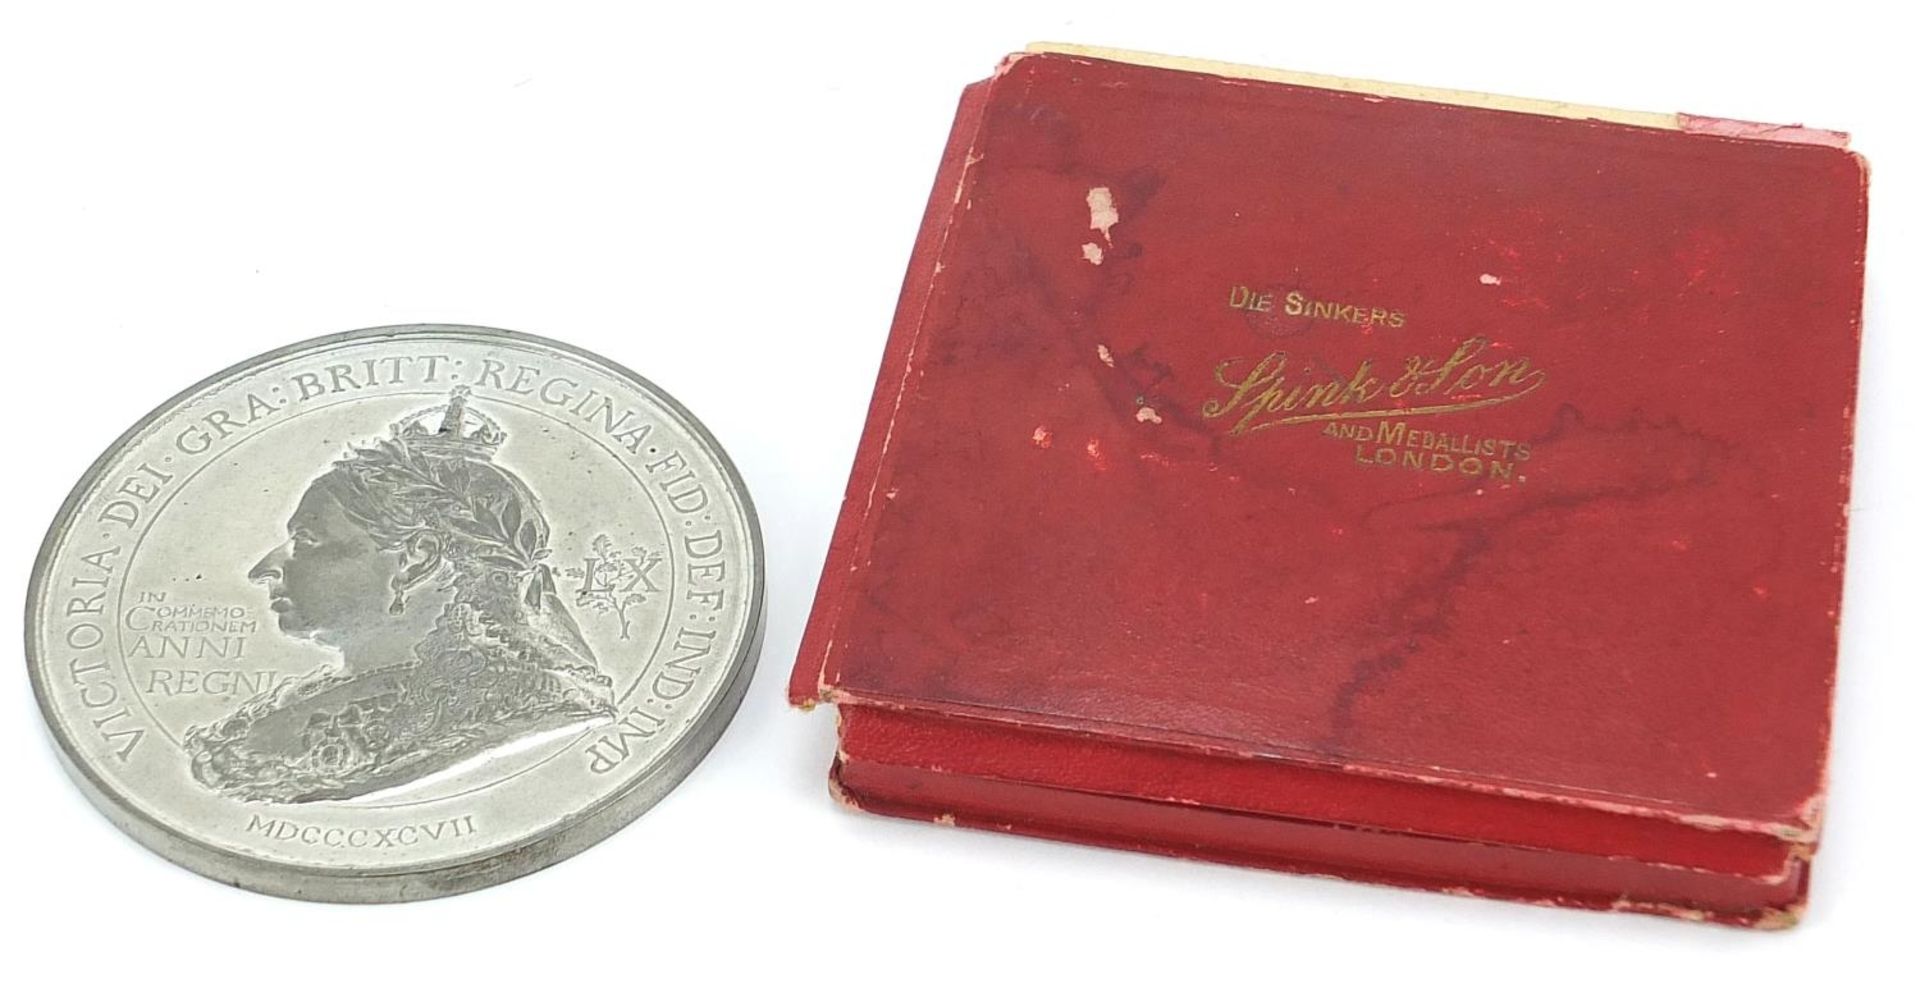 Queen Victoria Diamond Jubilee British Empire medal by Spink & Son with leather lined fitted case,